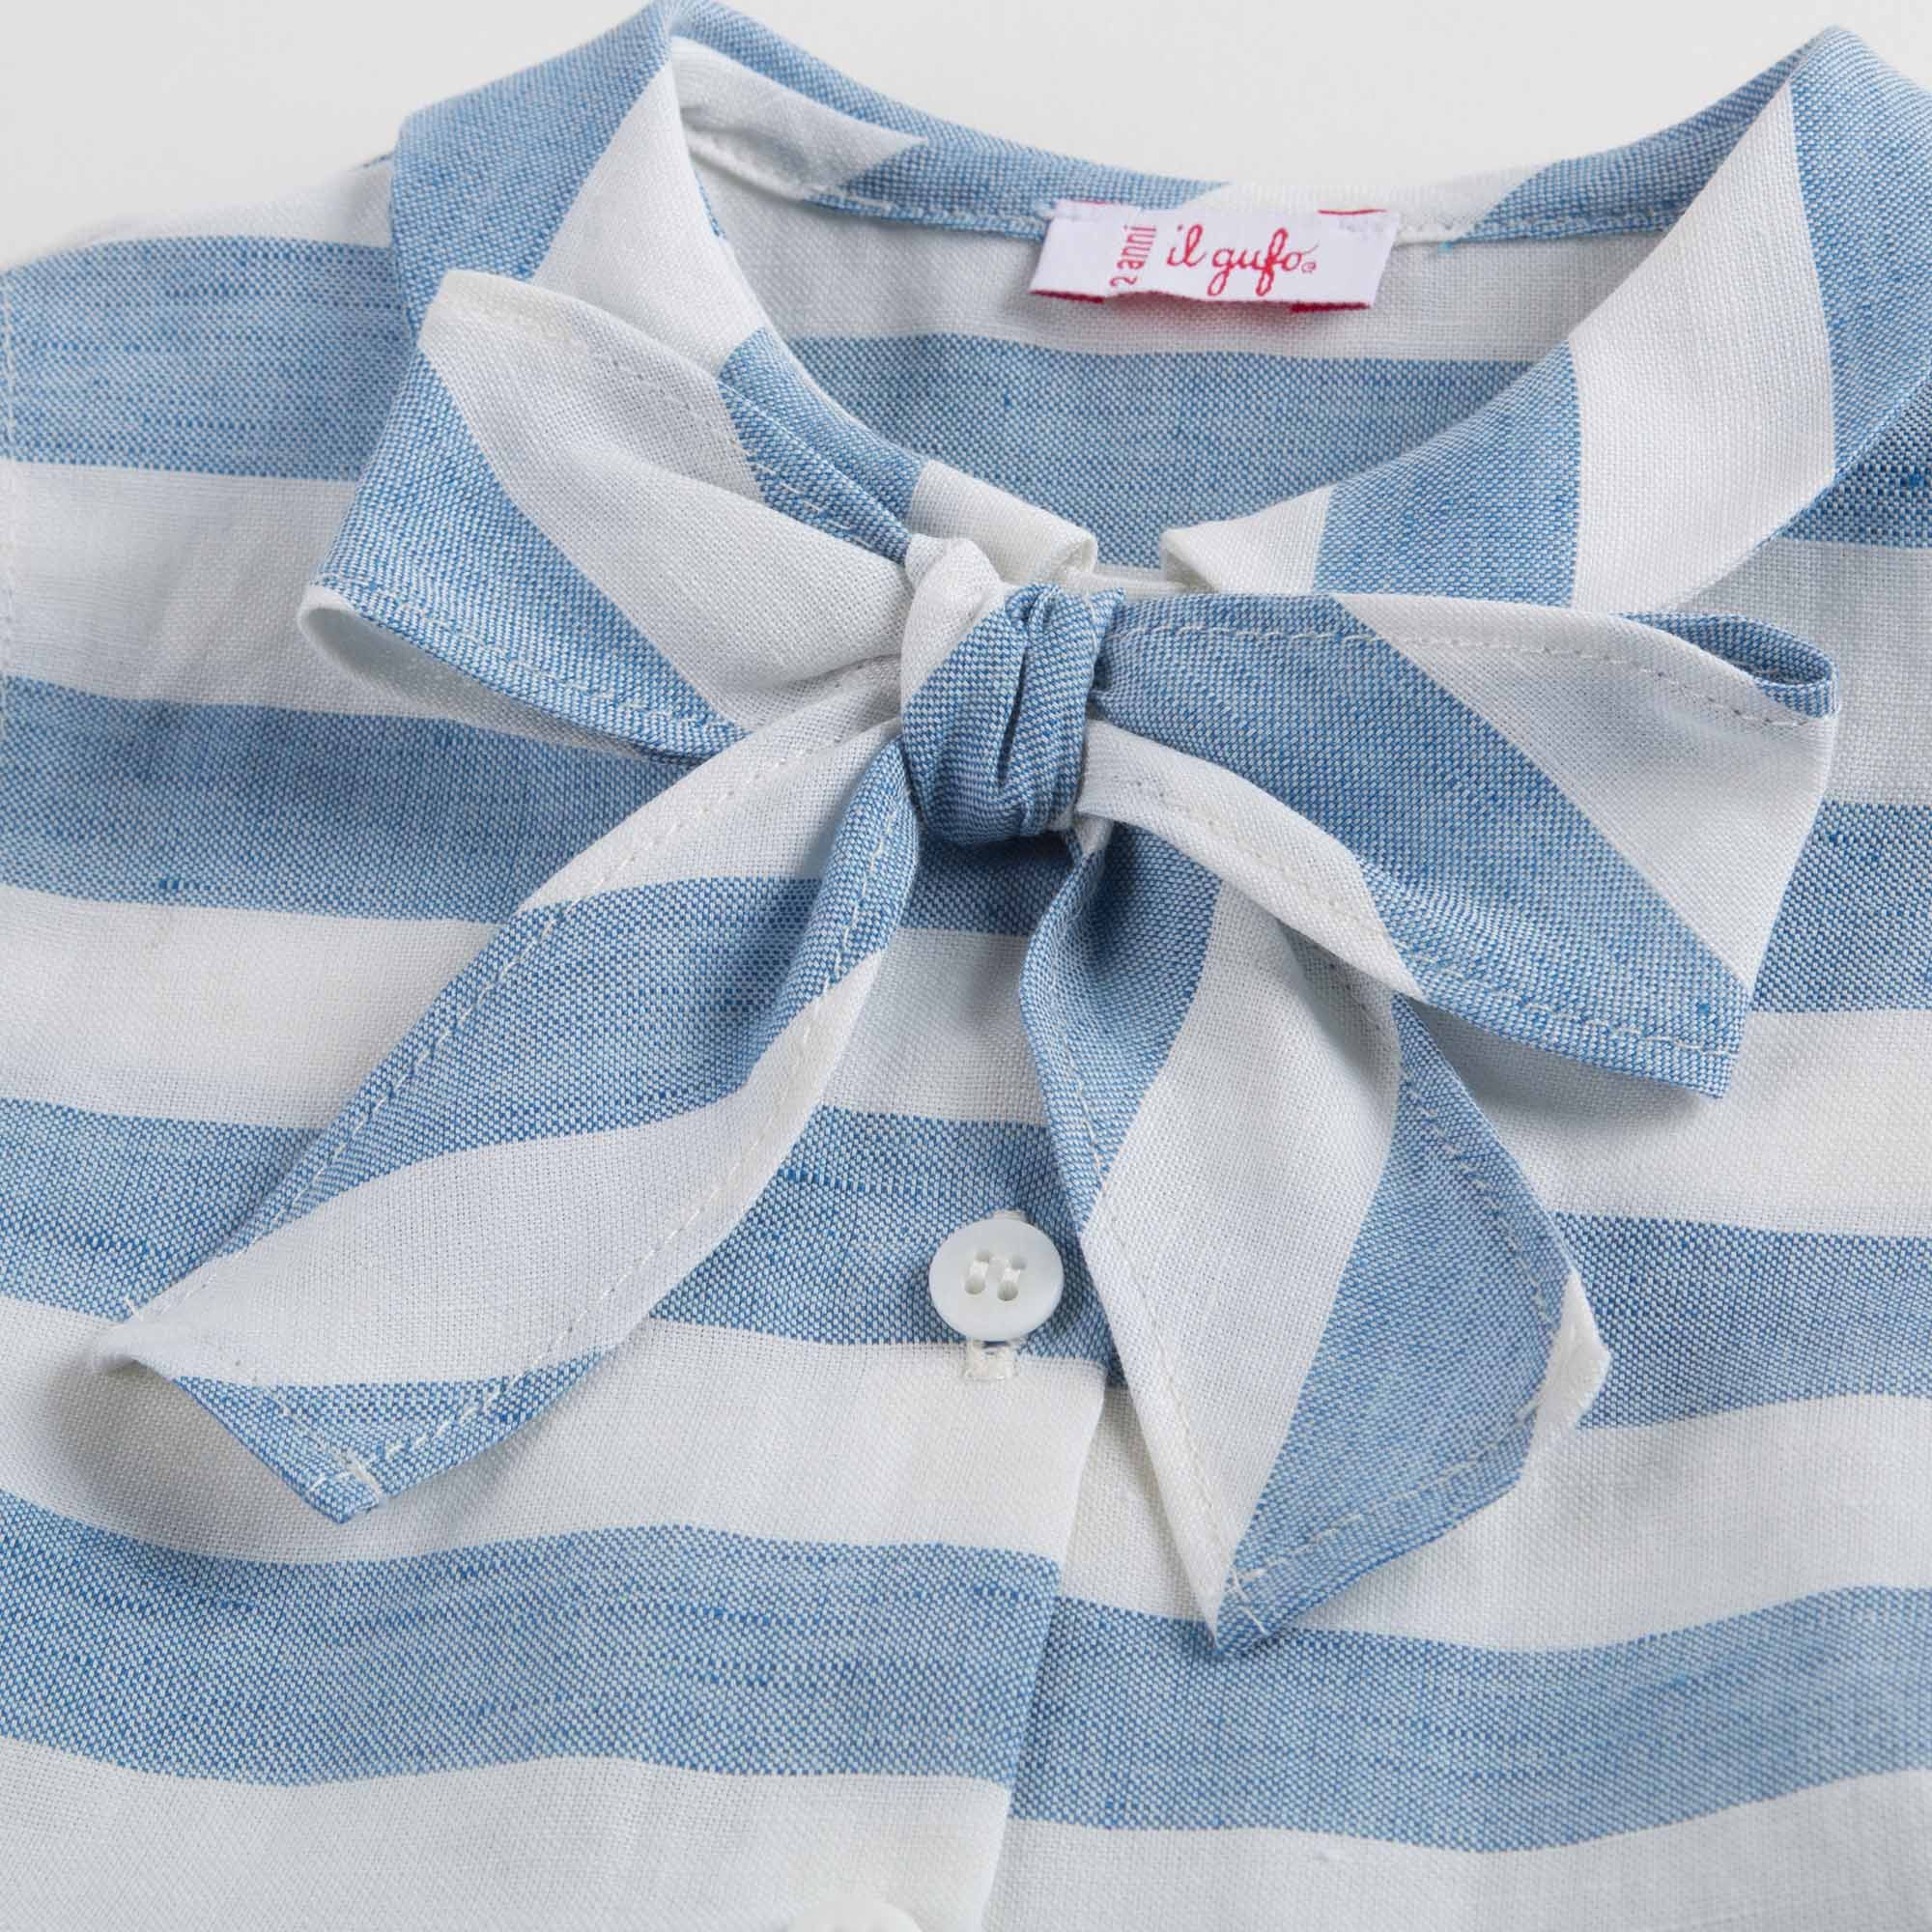 Girls Blue Striped Dress With Collar